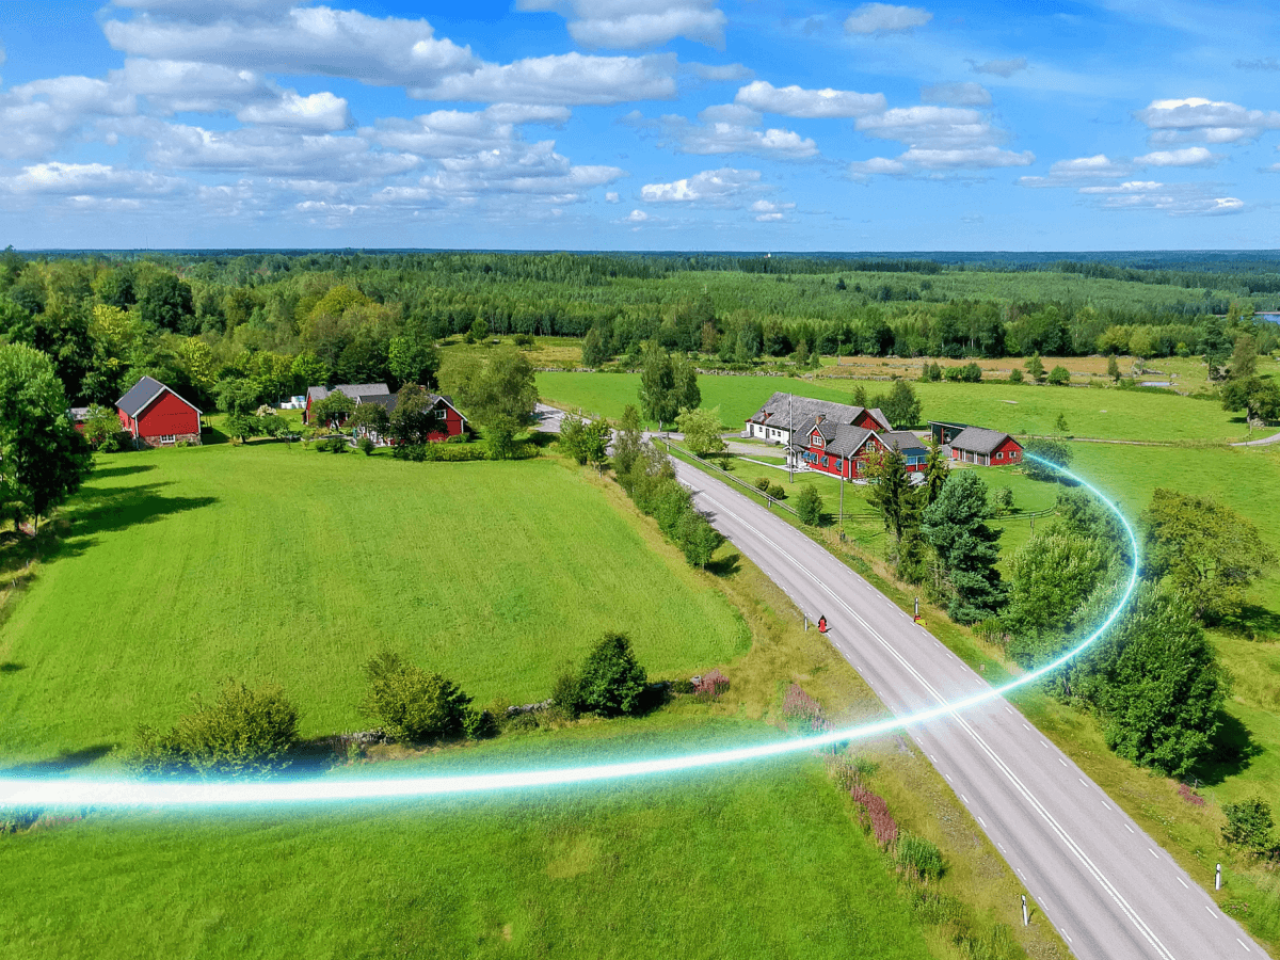 Connecting rural Americans to fiber broadband is a key priority for Corning and the U.S. government.